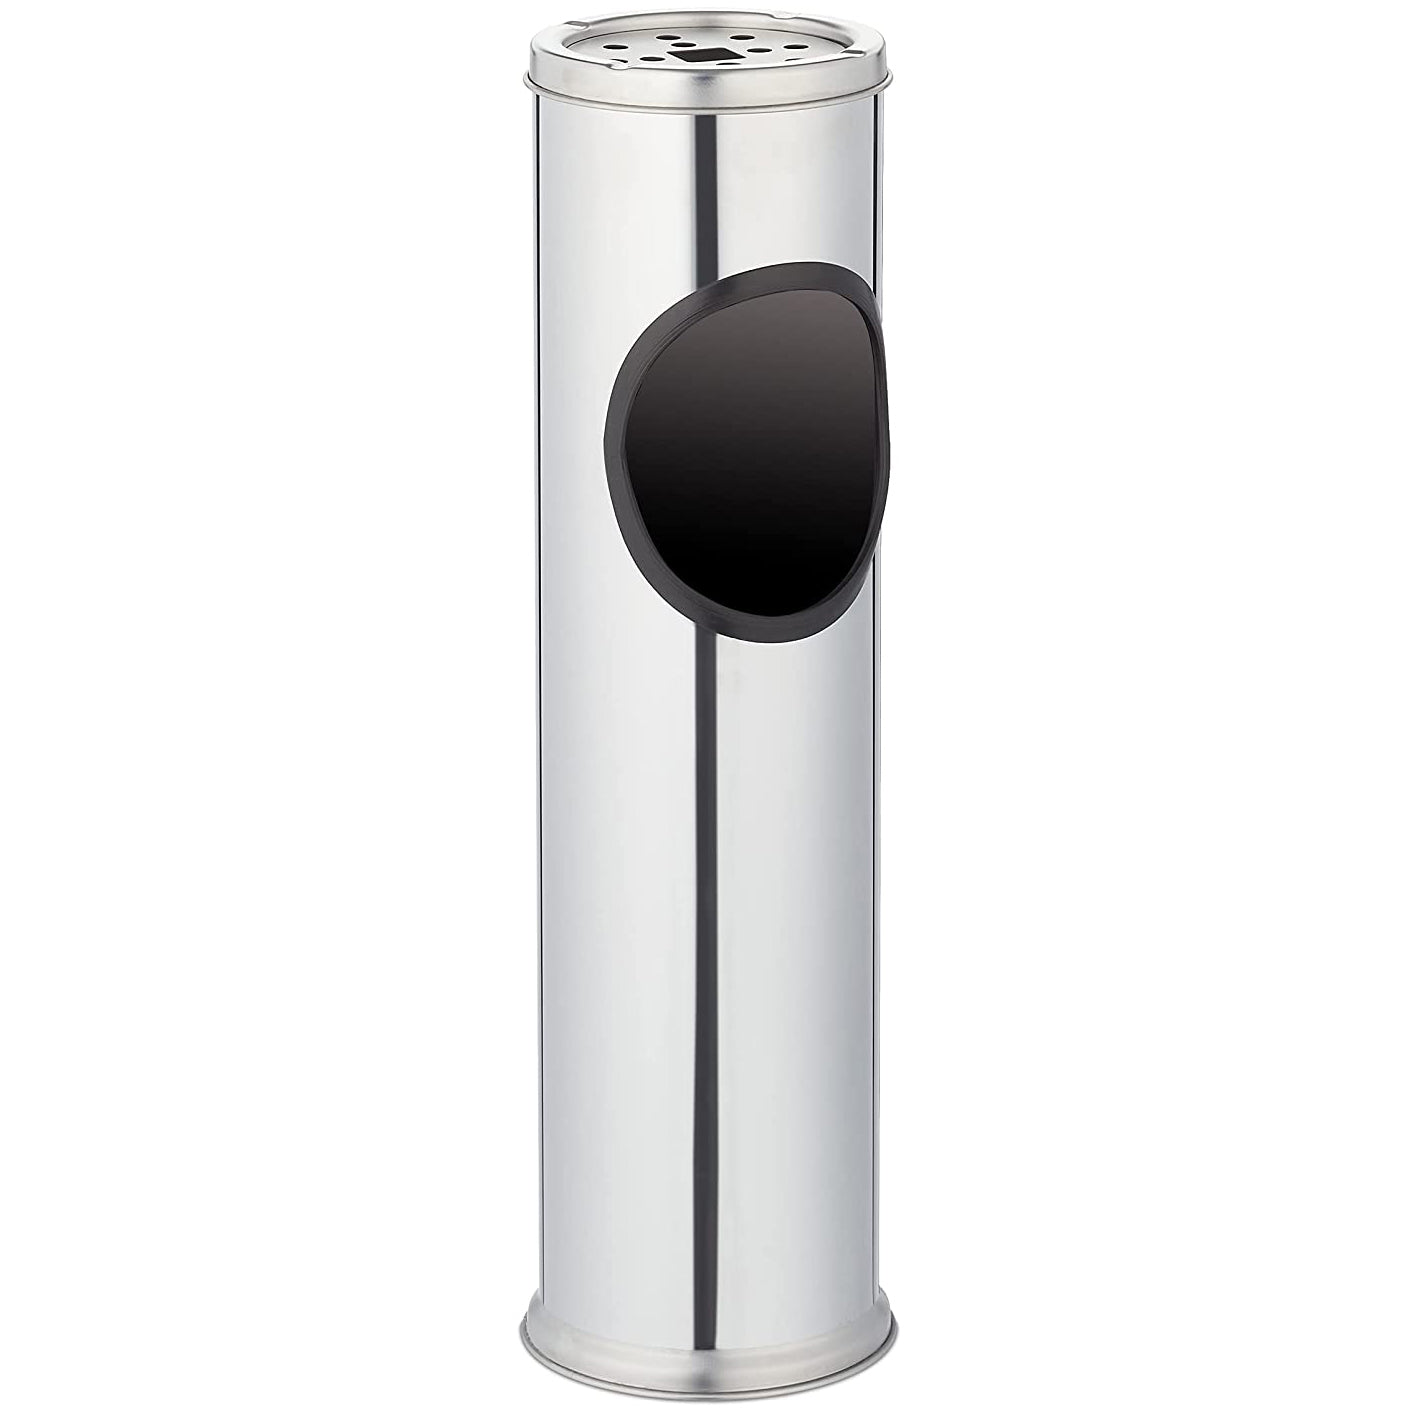 GEEZY Garden Stainless Steel Bin with Ashtray